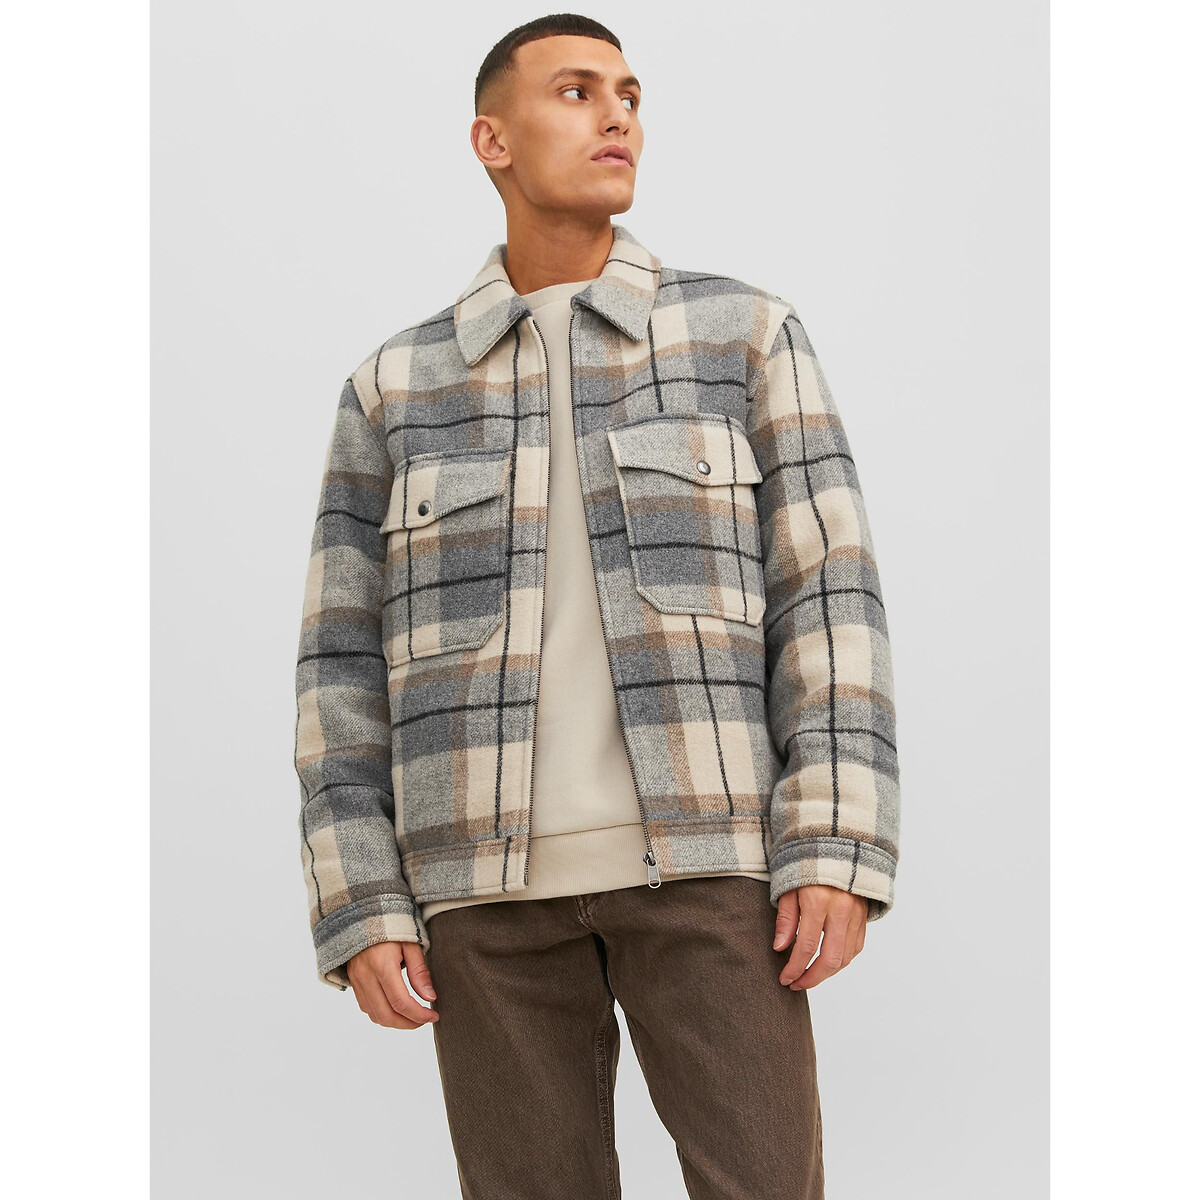 Image of Checked Lined Jacket